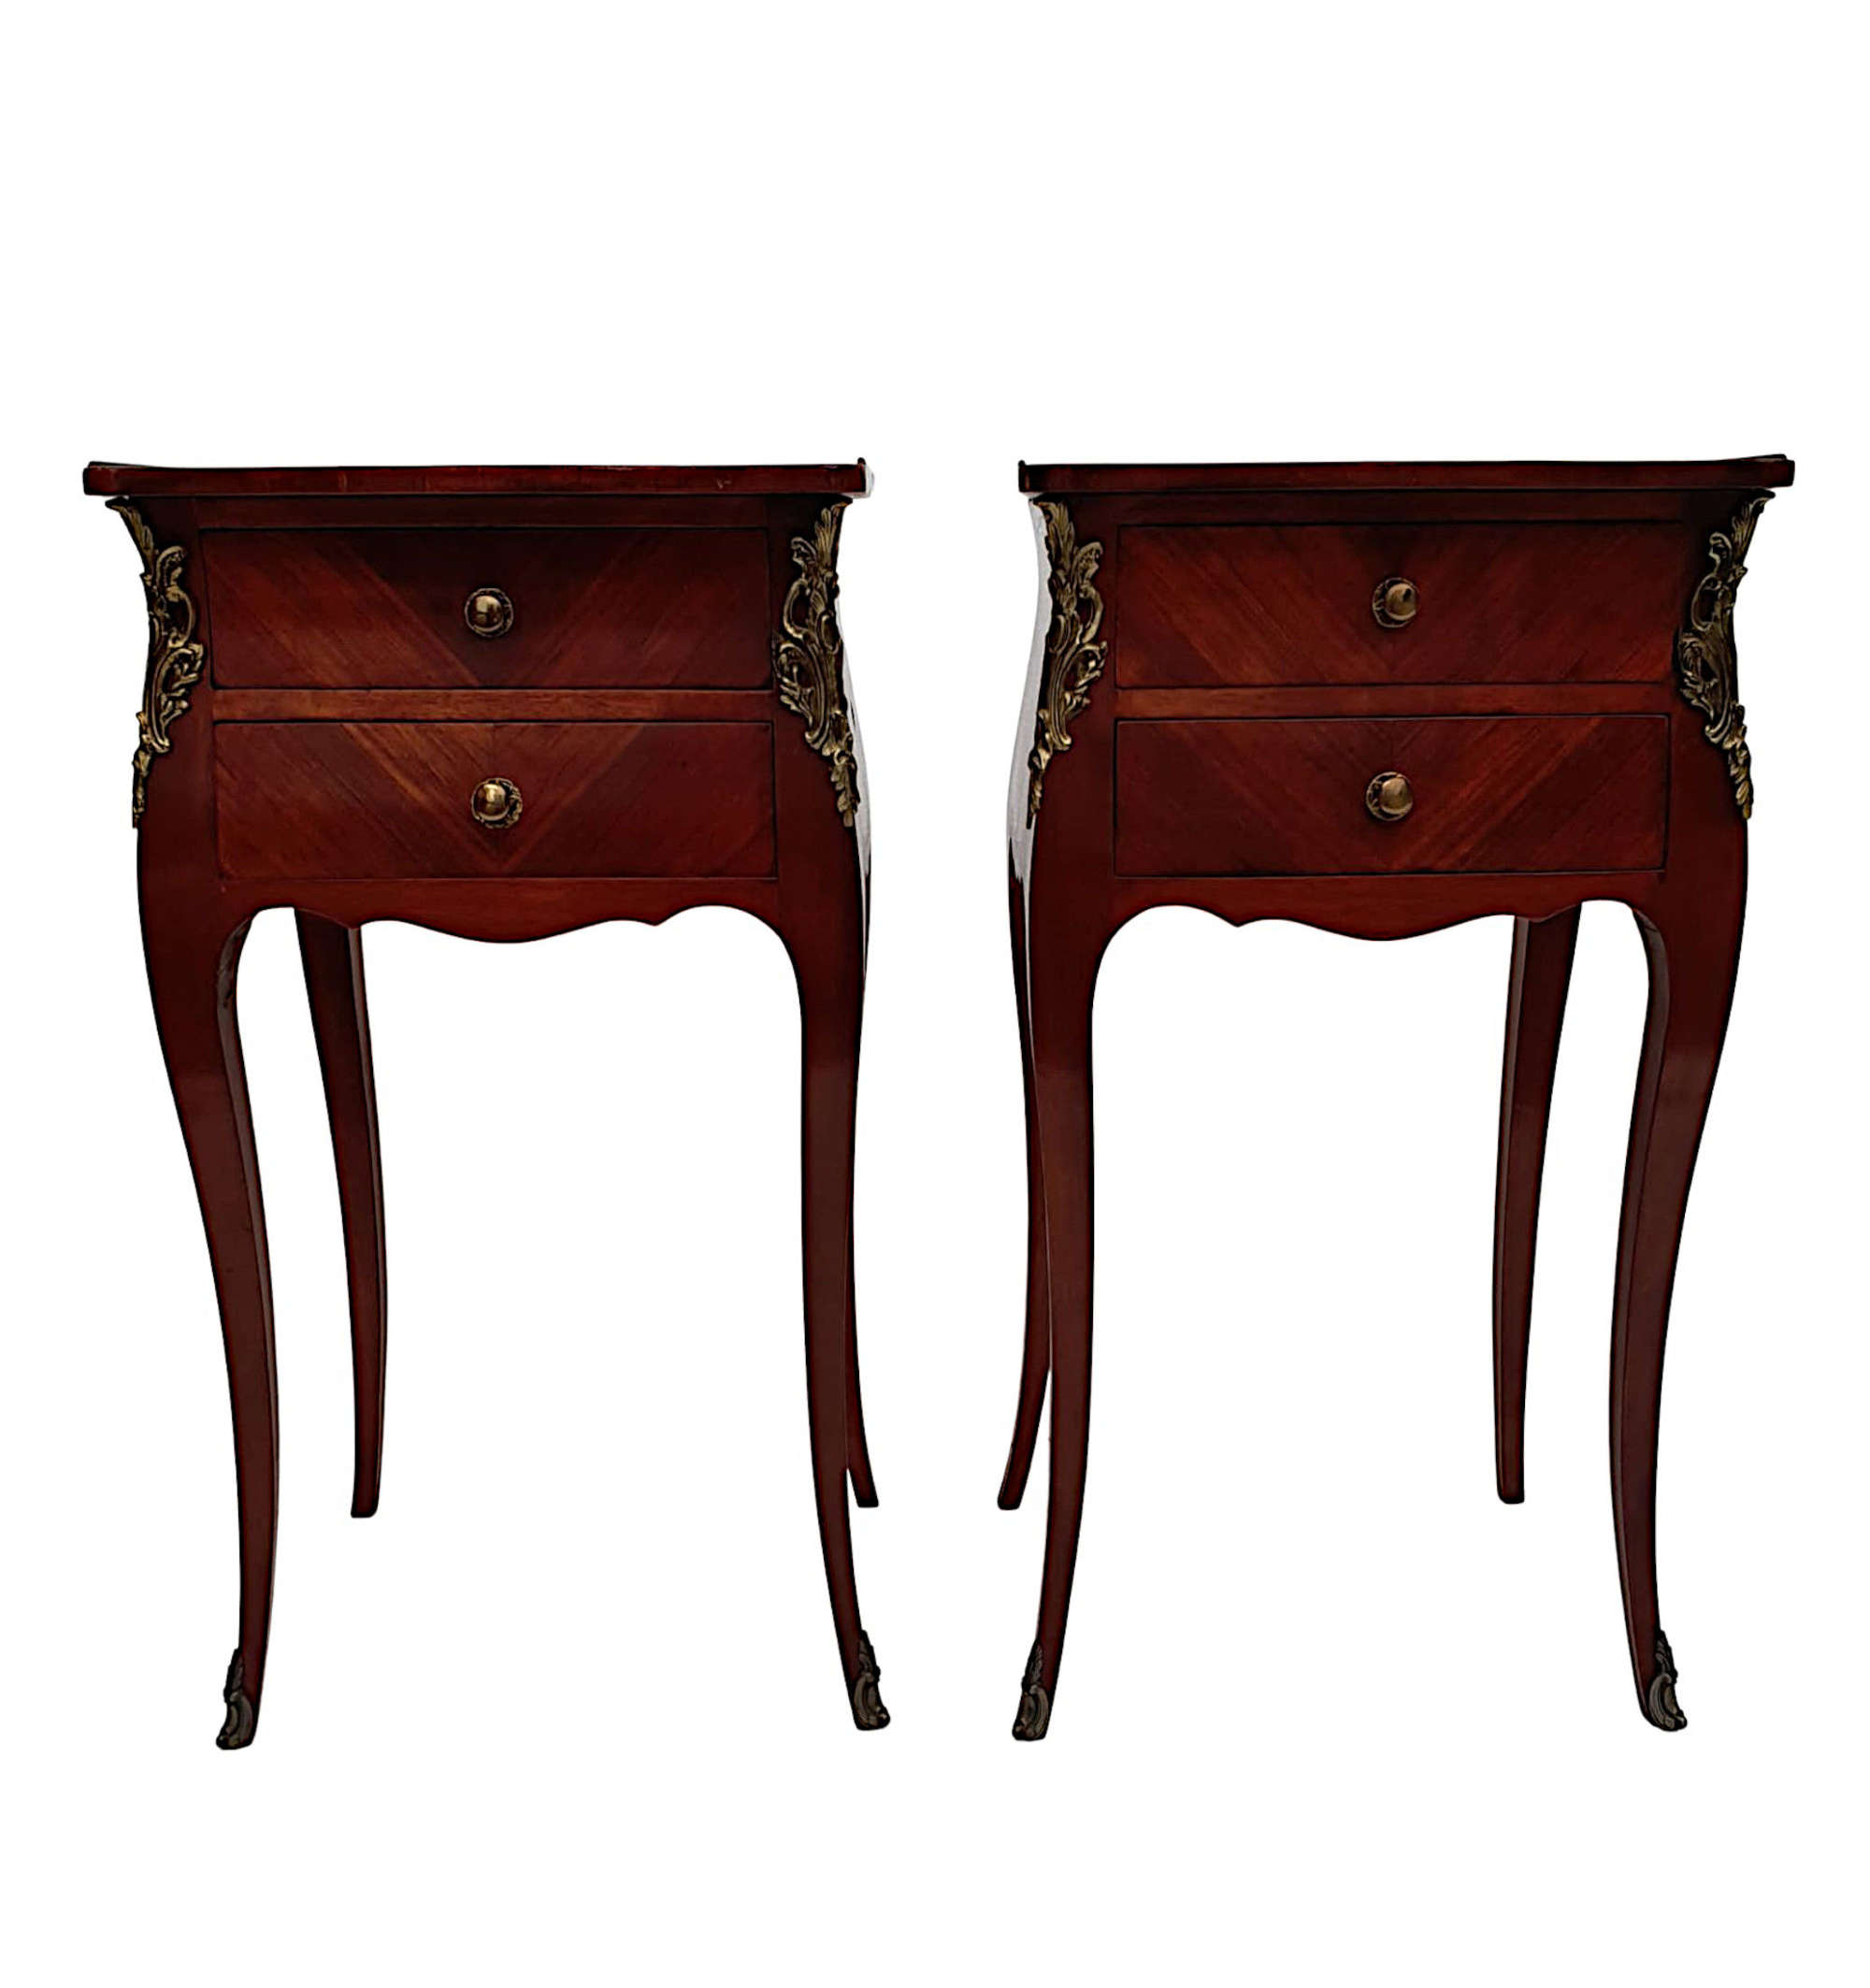 A Gorgeous Pair of 19th Century Kingwood Bedside Chests